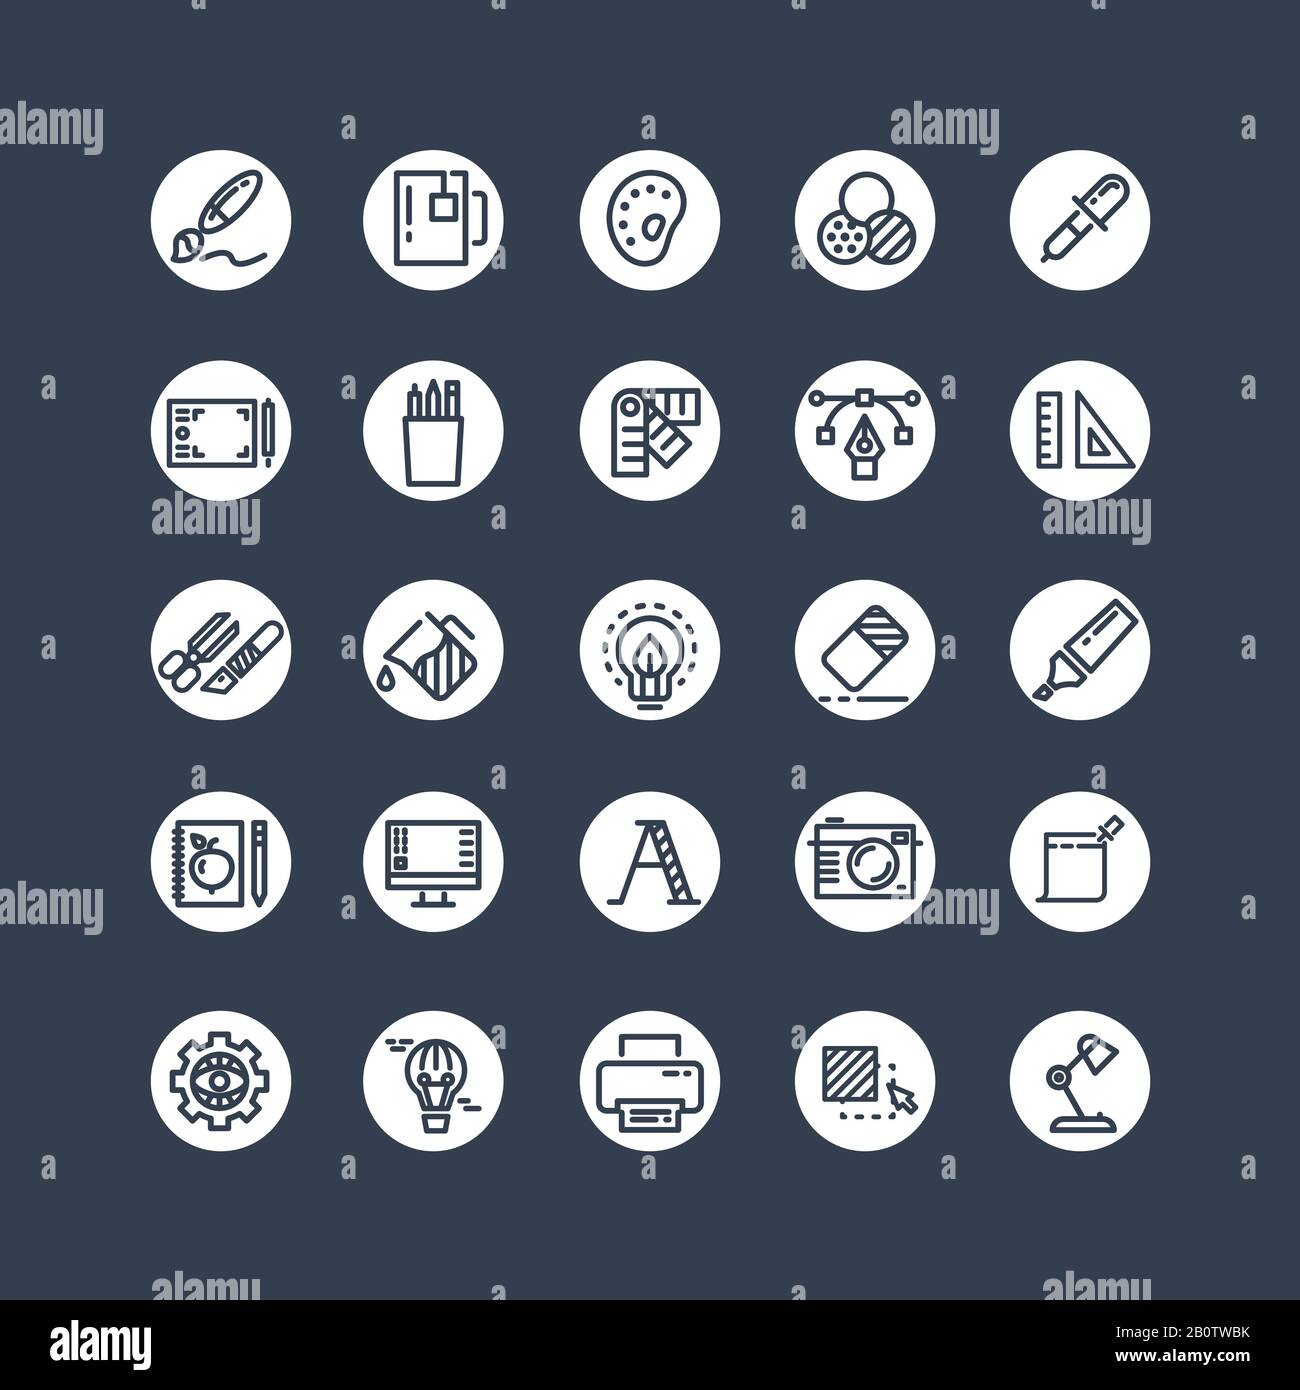 Graphic design icons - tools, office stationery, creative line icons. Vector illustration Stock Vector